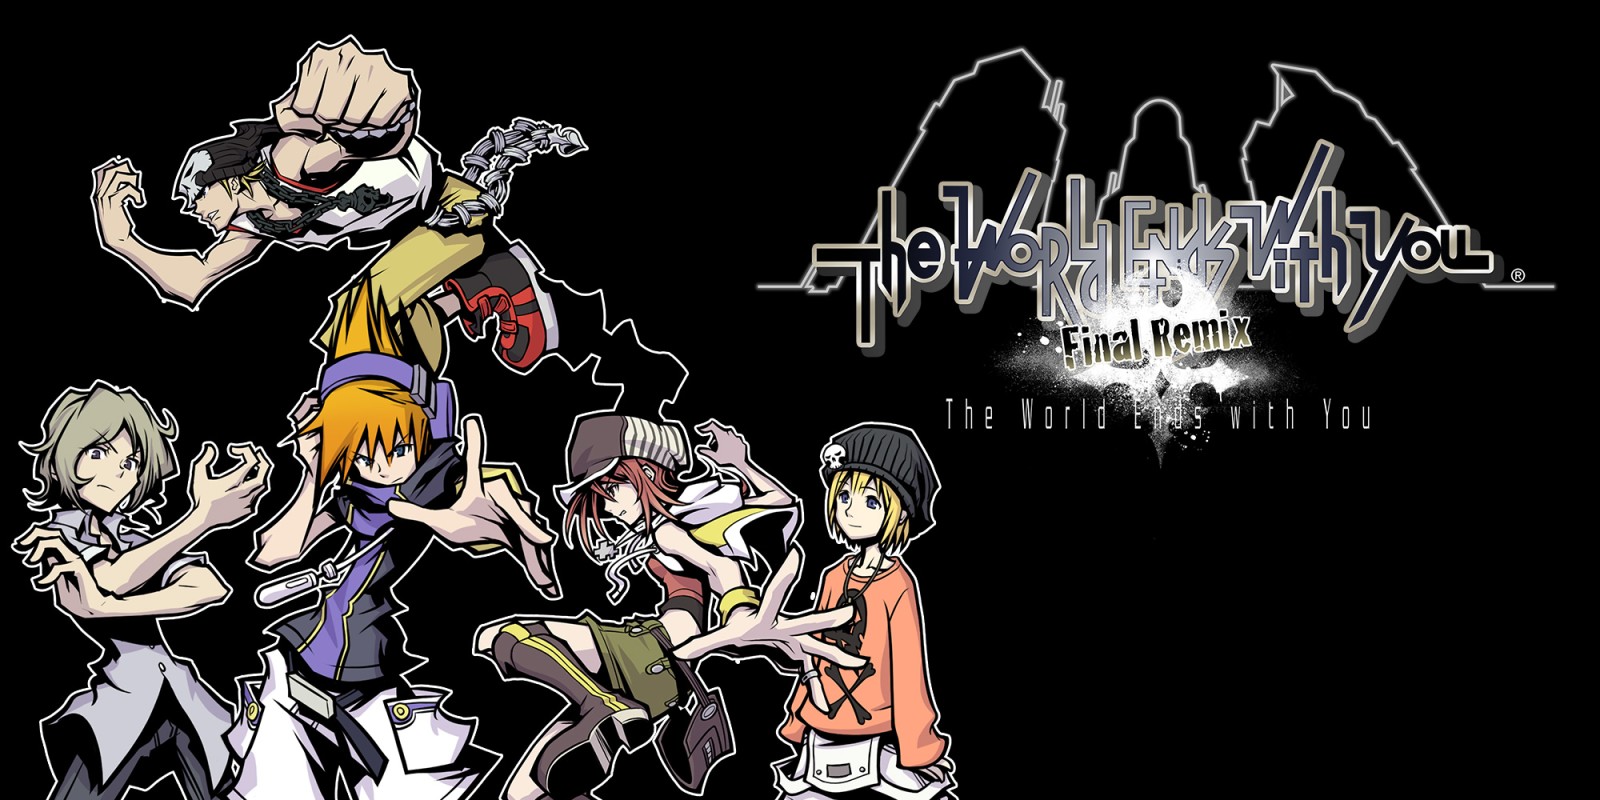 The World Ends With You Logo